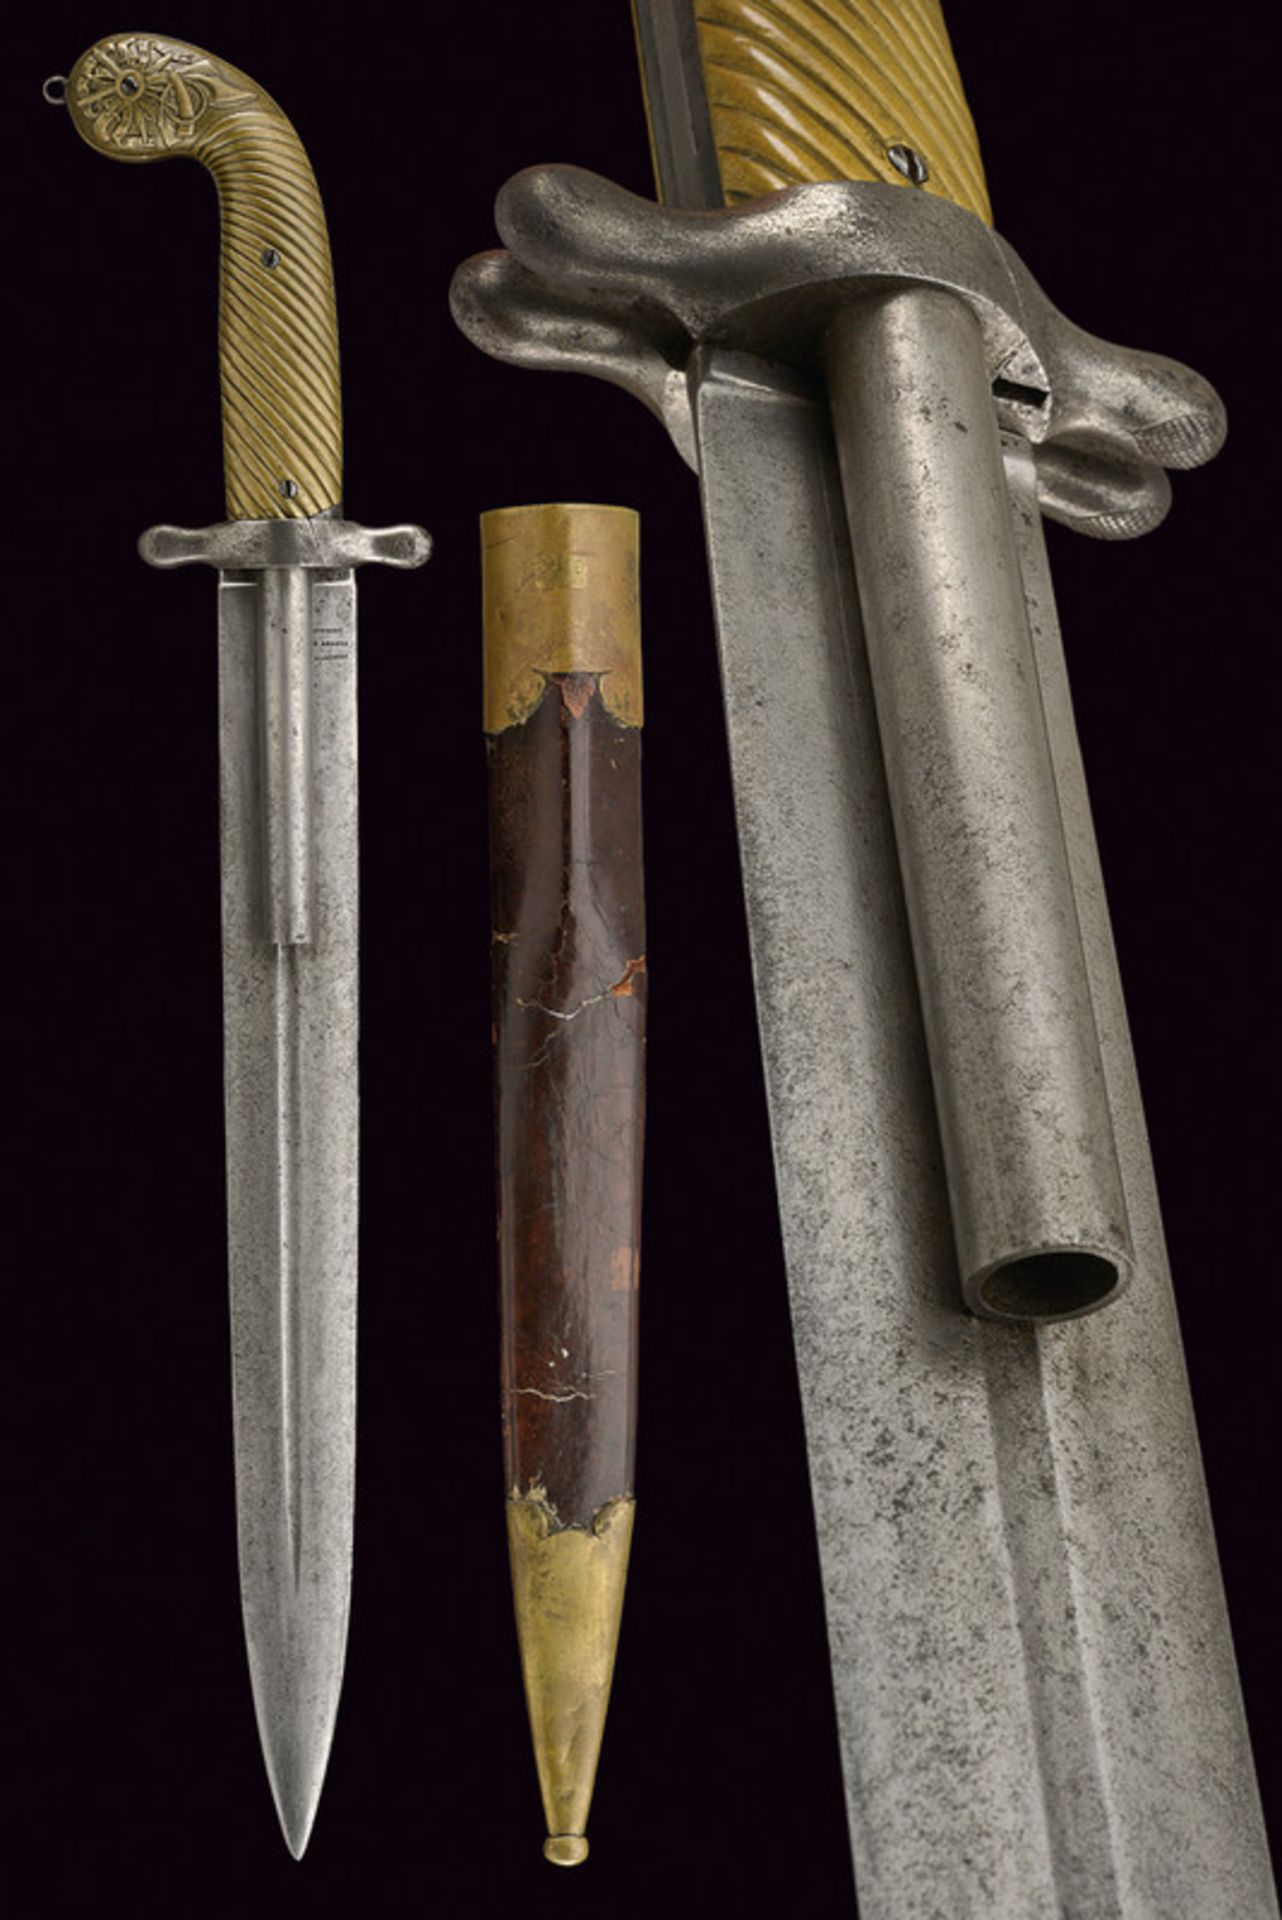 A rare and interesting Dumonthier dagger combined with double-barrelled pistol dating: third quarter